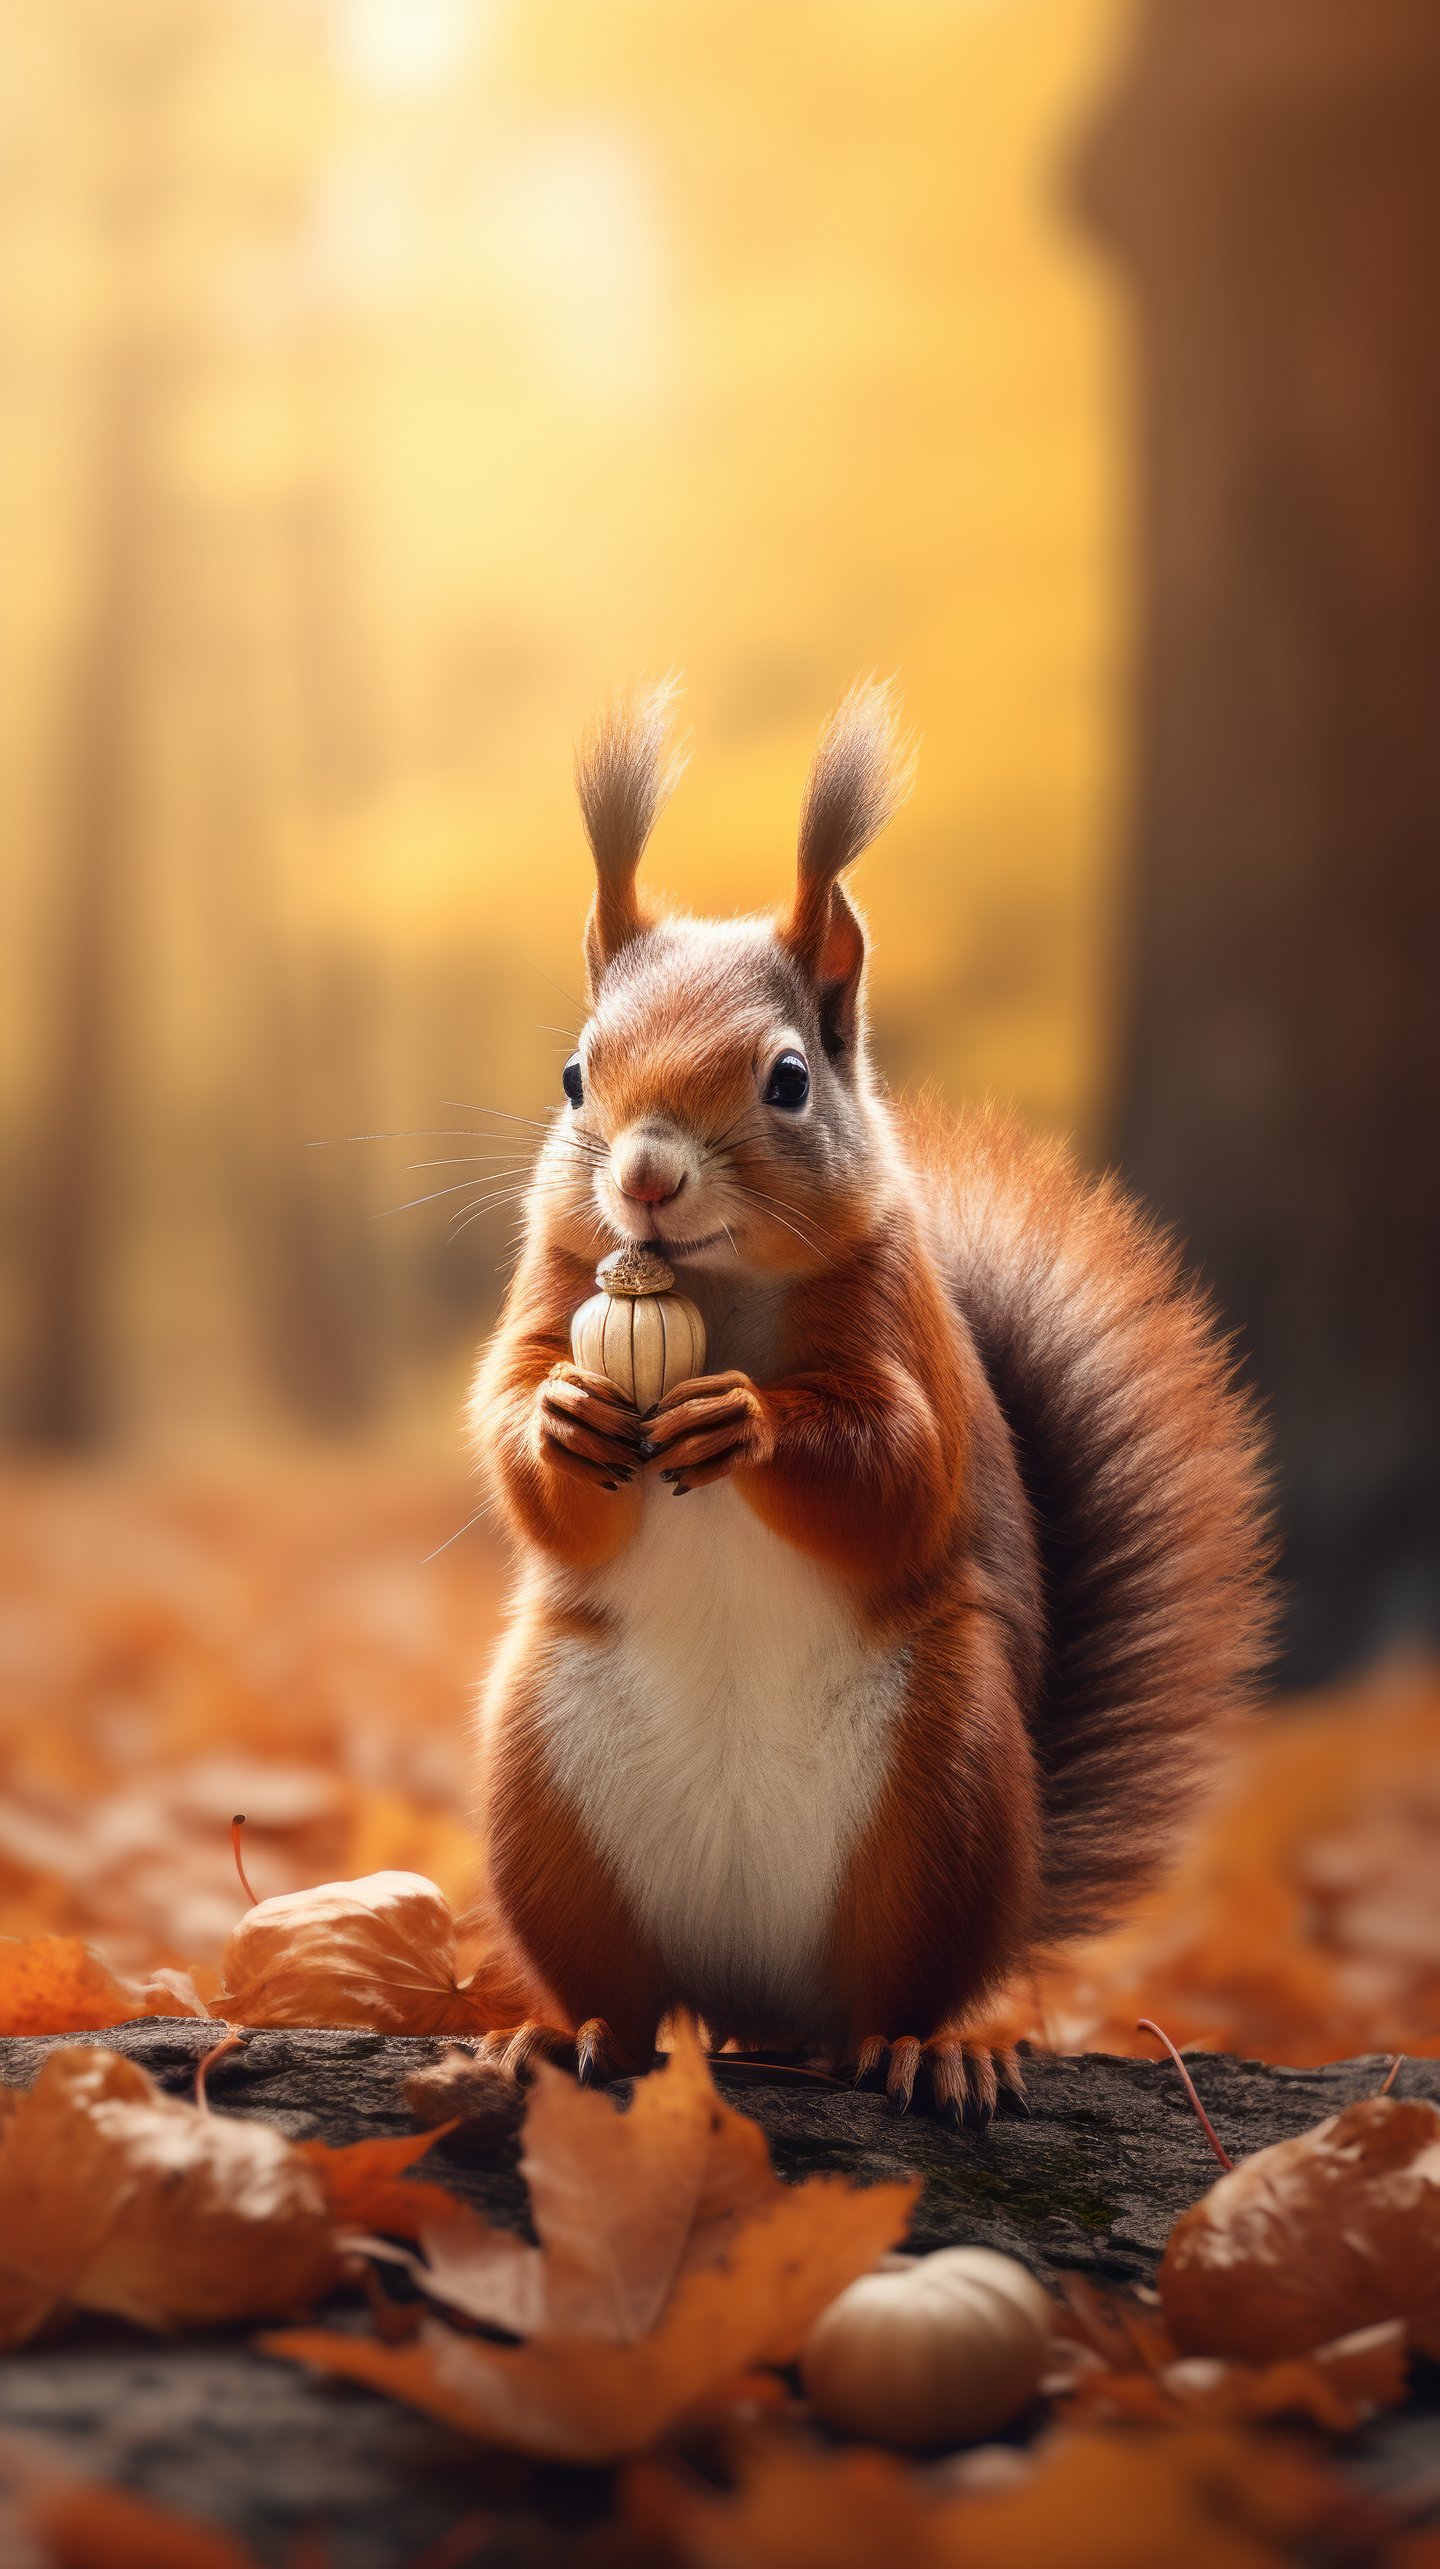 Charming squirrel with a fluffy tail holding a nut surrounded by autumn leaves and basked in warm sunbeams, perfect for a fall-themed phone wallpaper.